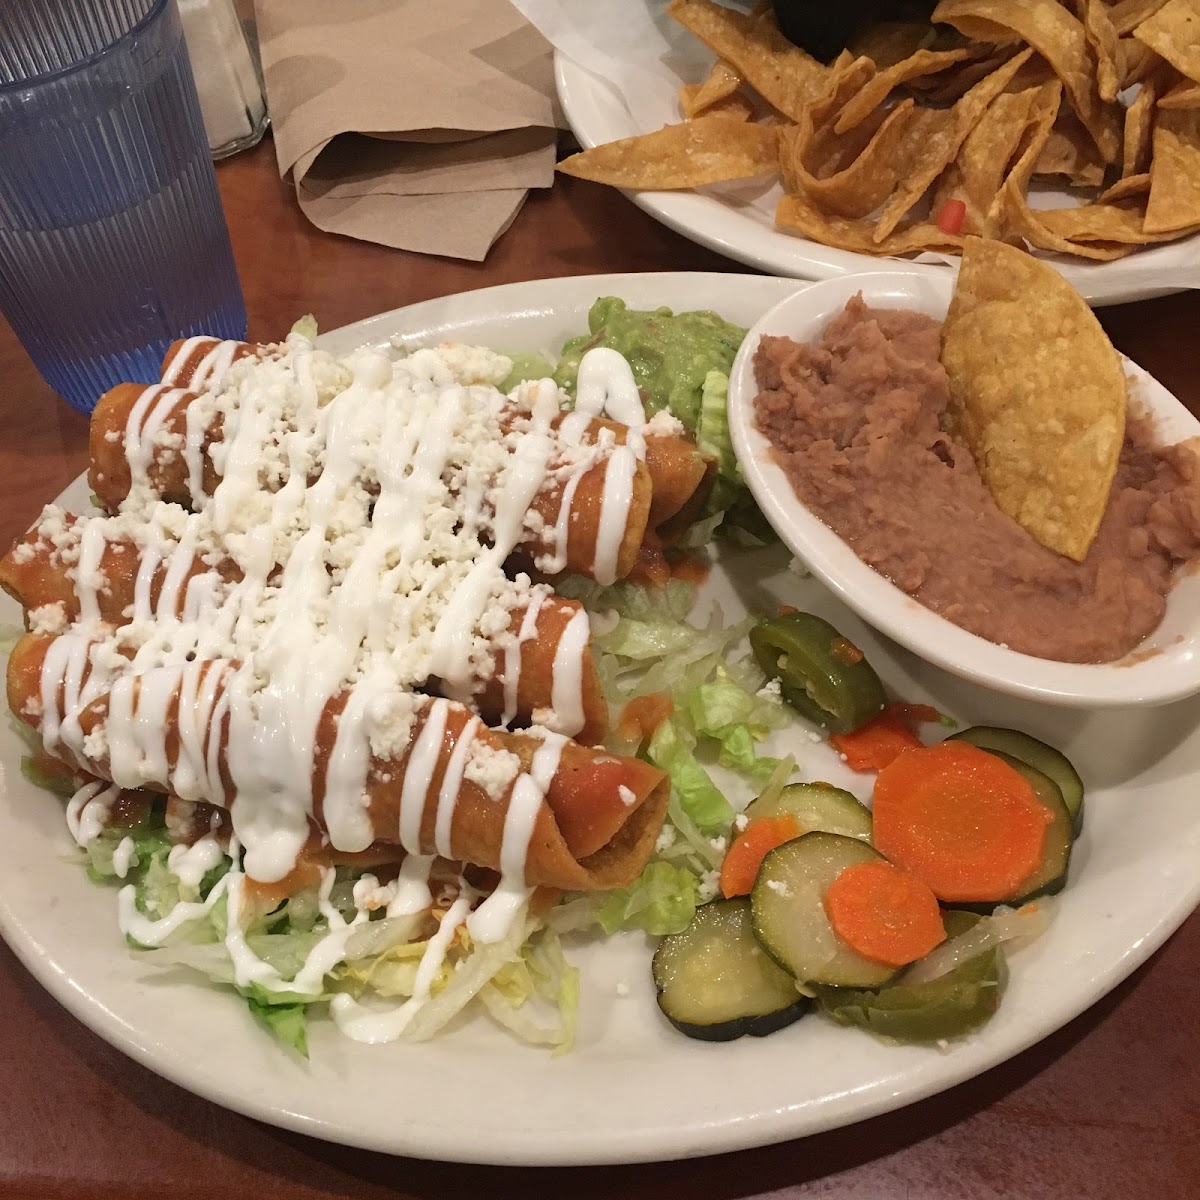 Great food, and lots of gluten free options! Everything on the menu was clearly labeled gluten free. I got the chicken taquitos, and chips and salsa. Really good food!